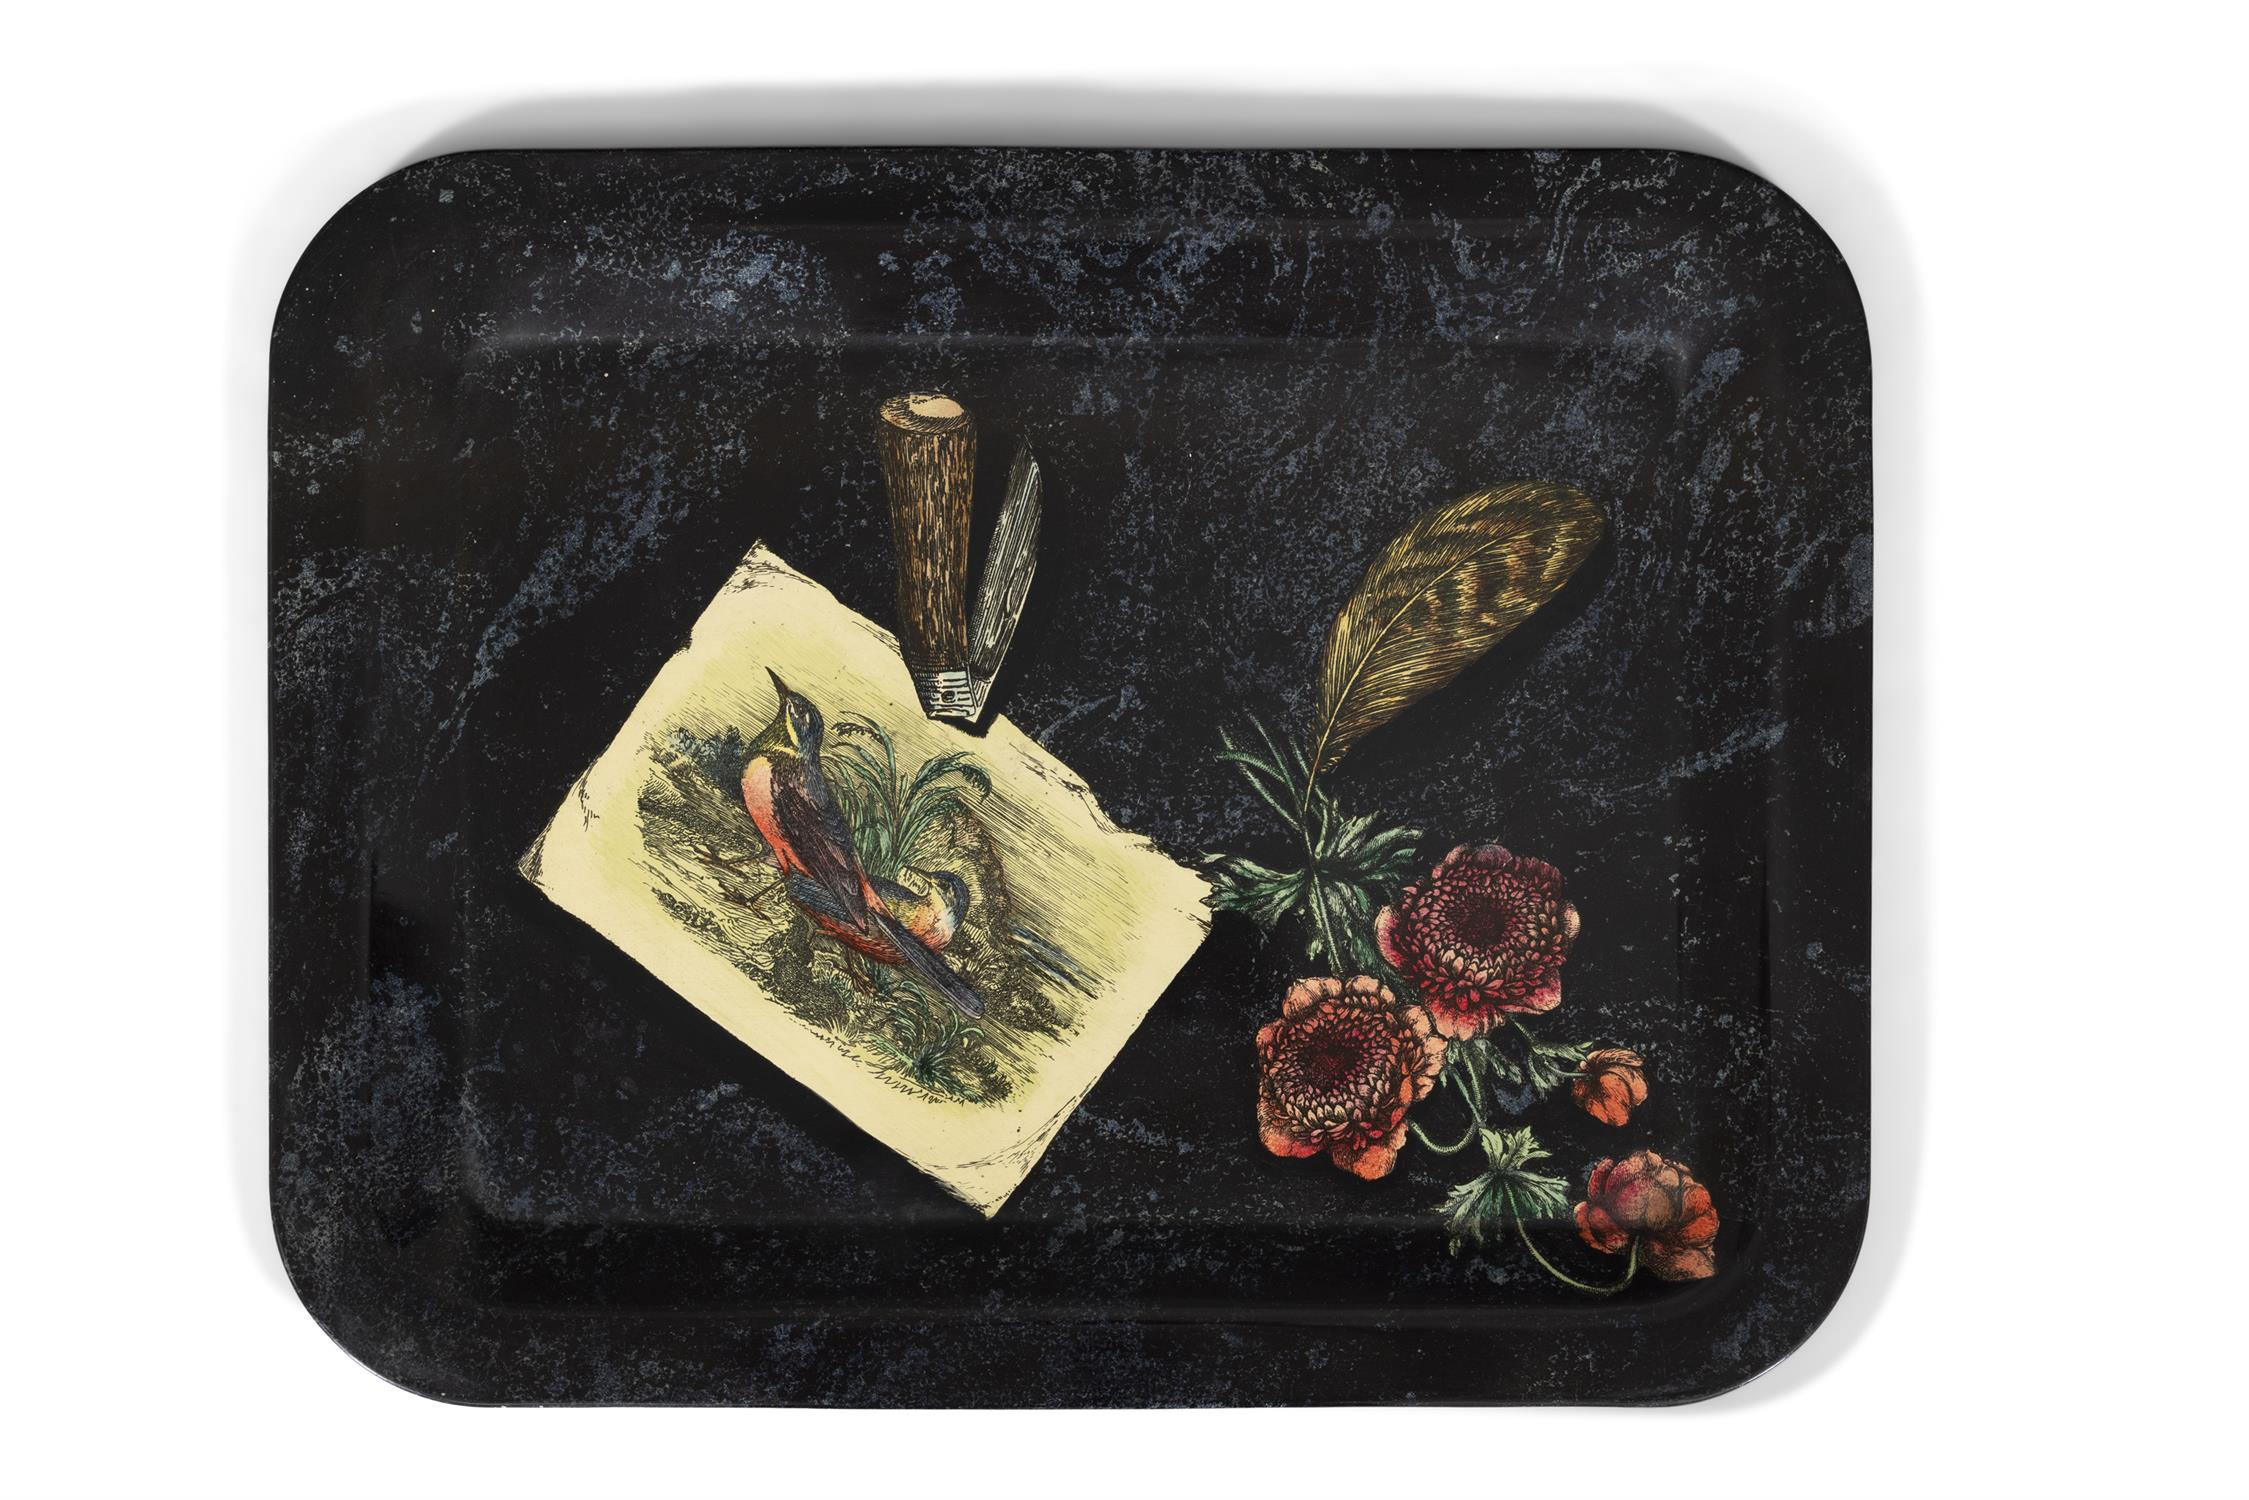 FORNASETTI An enamel tray by Fornasetti, with maker's label, Italy c. 1970. 58 x 46.5cm - Image 3 of 4